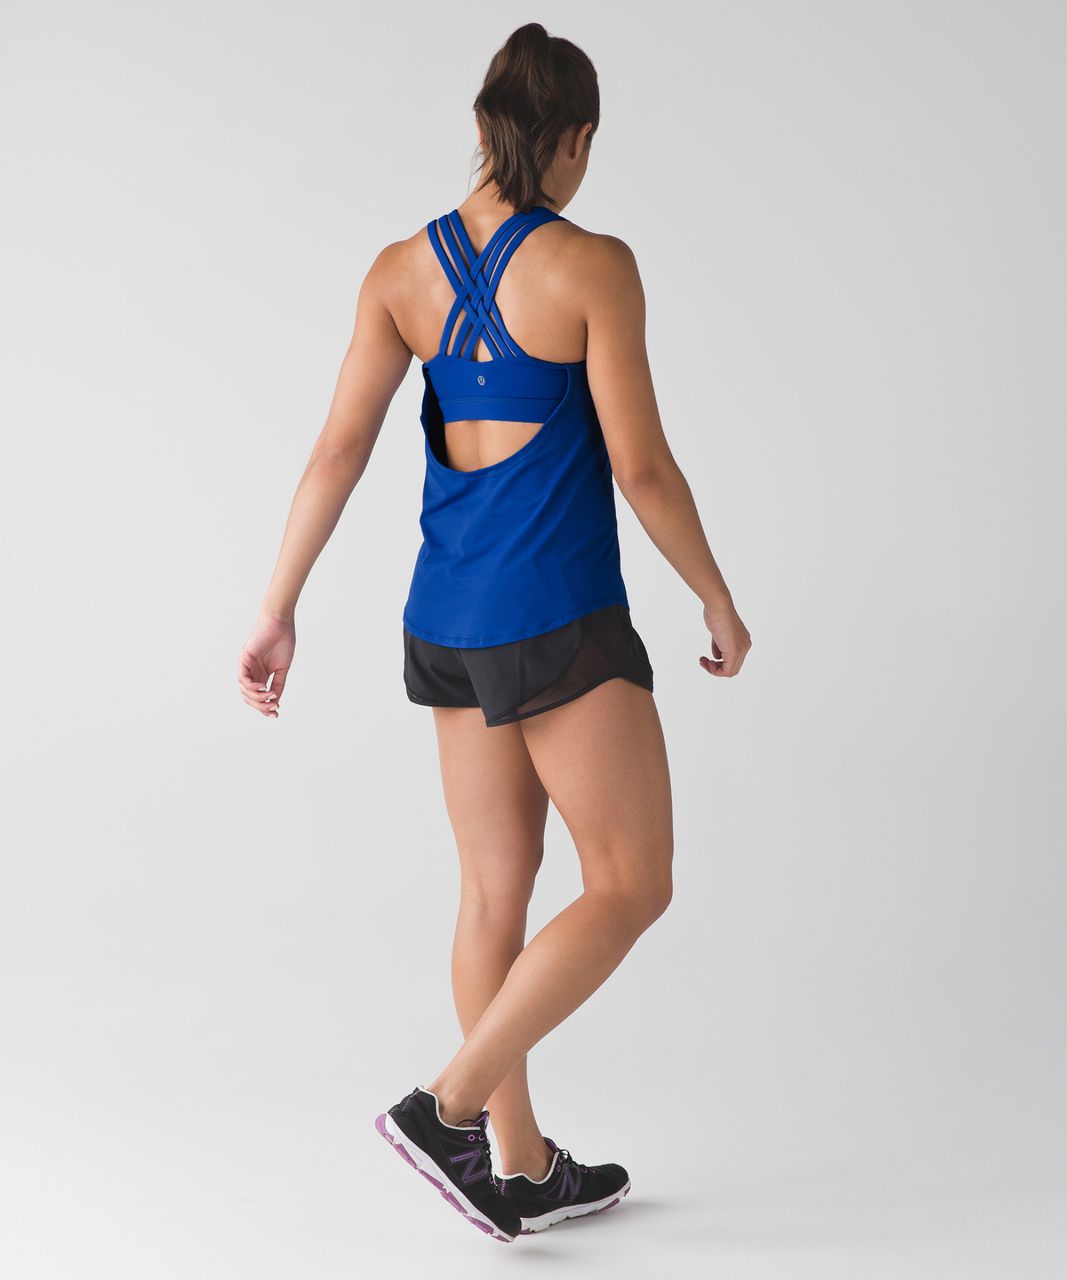 Beat the heat with the Impact Run and Accelerate athletic tank